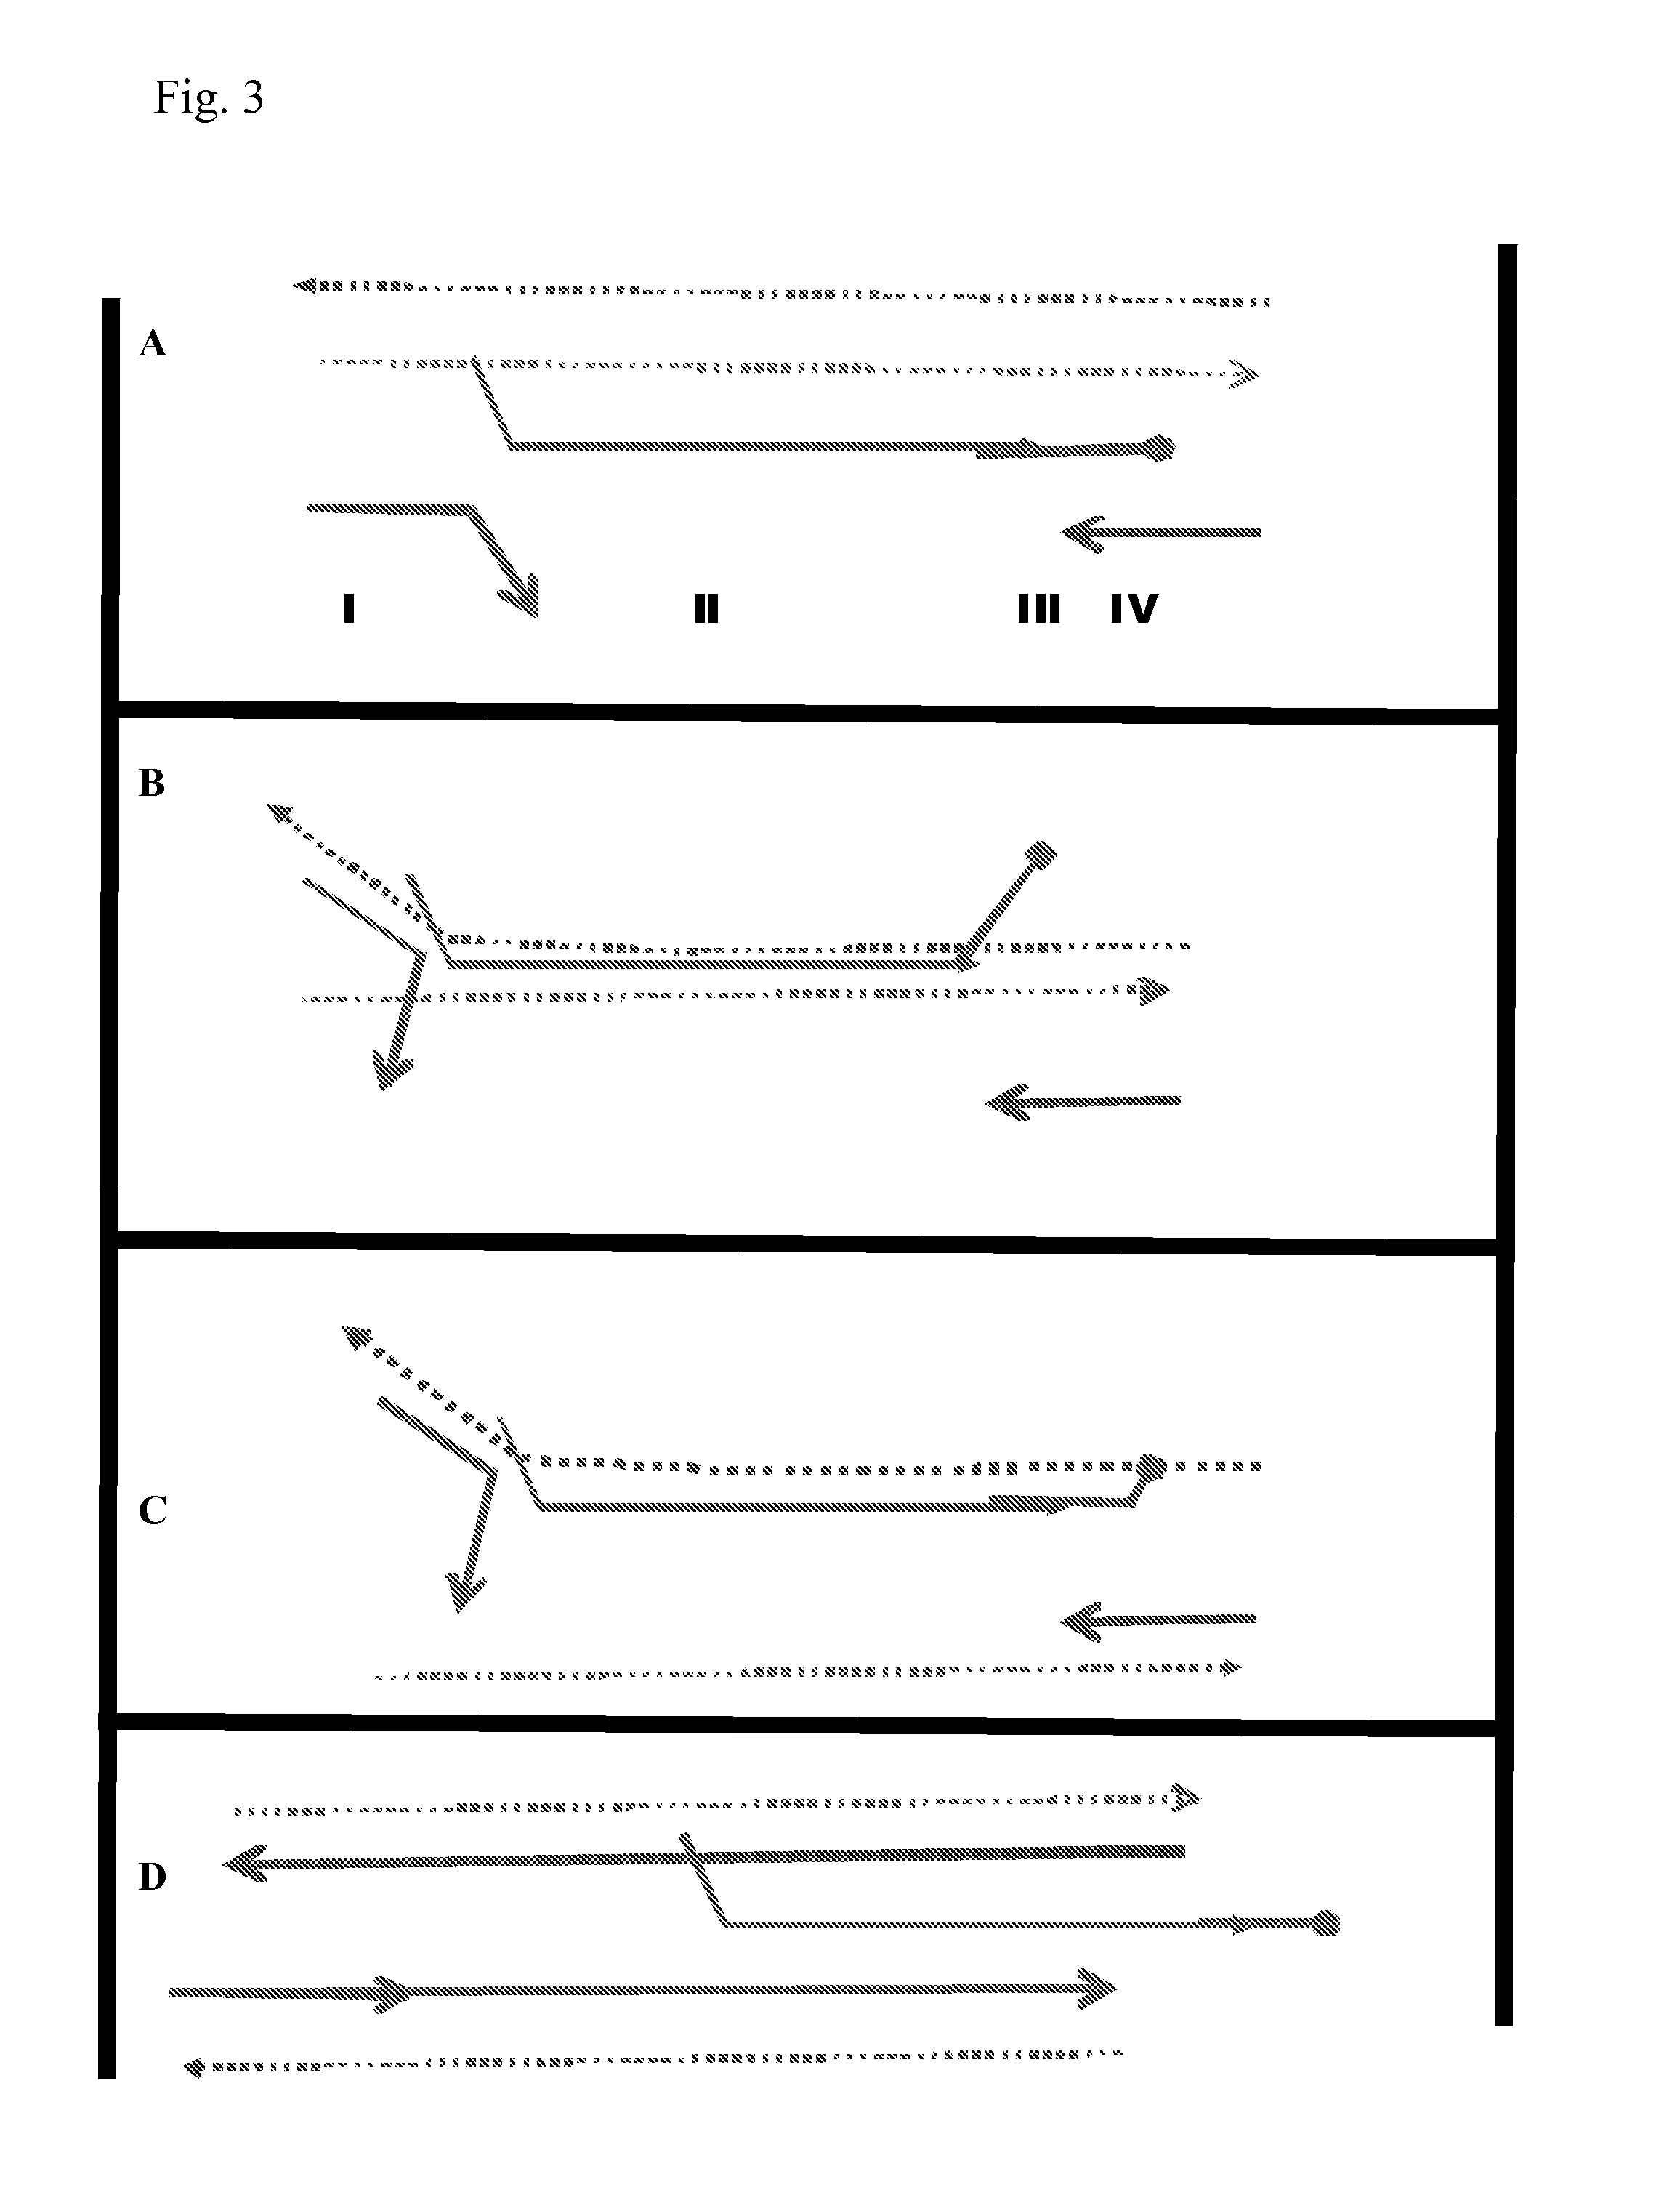 Isothermal nucleic acid amplification